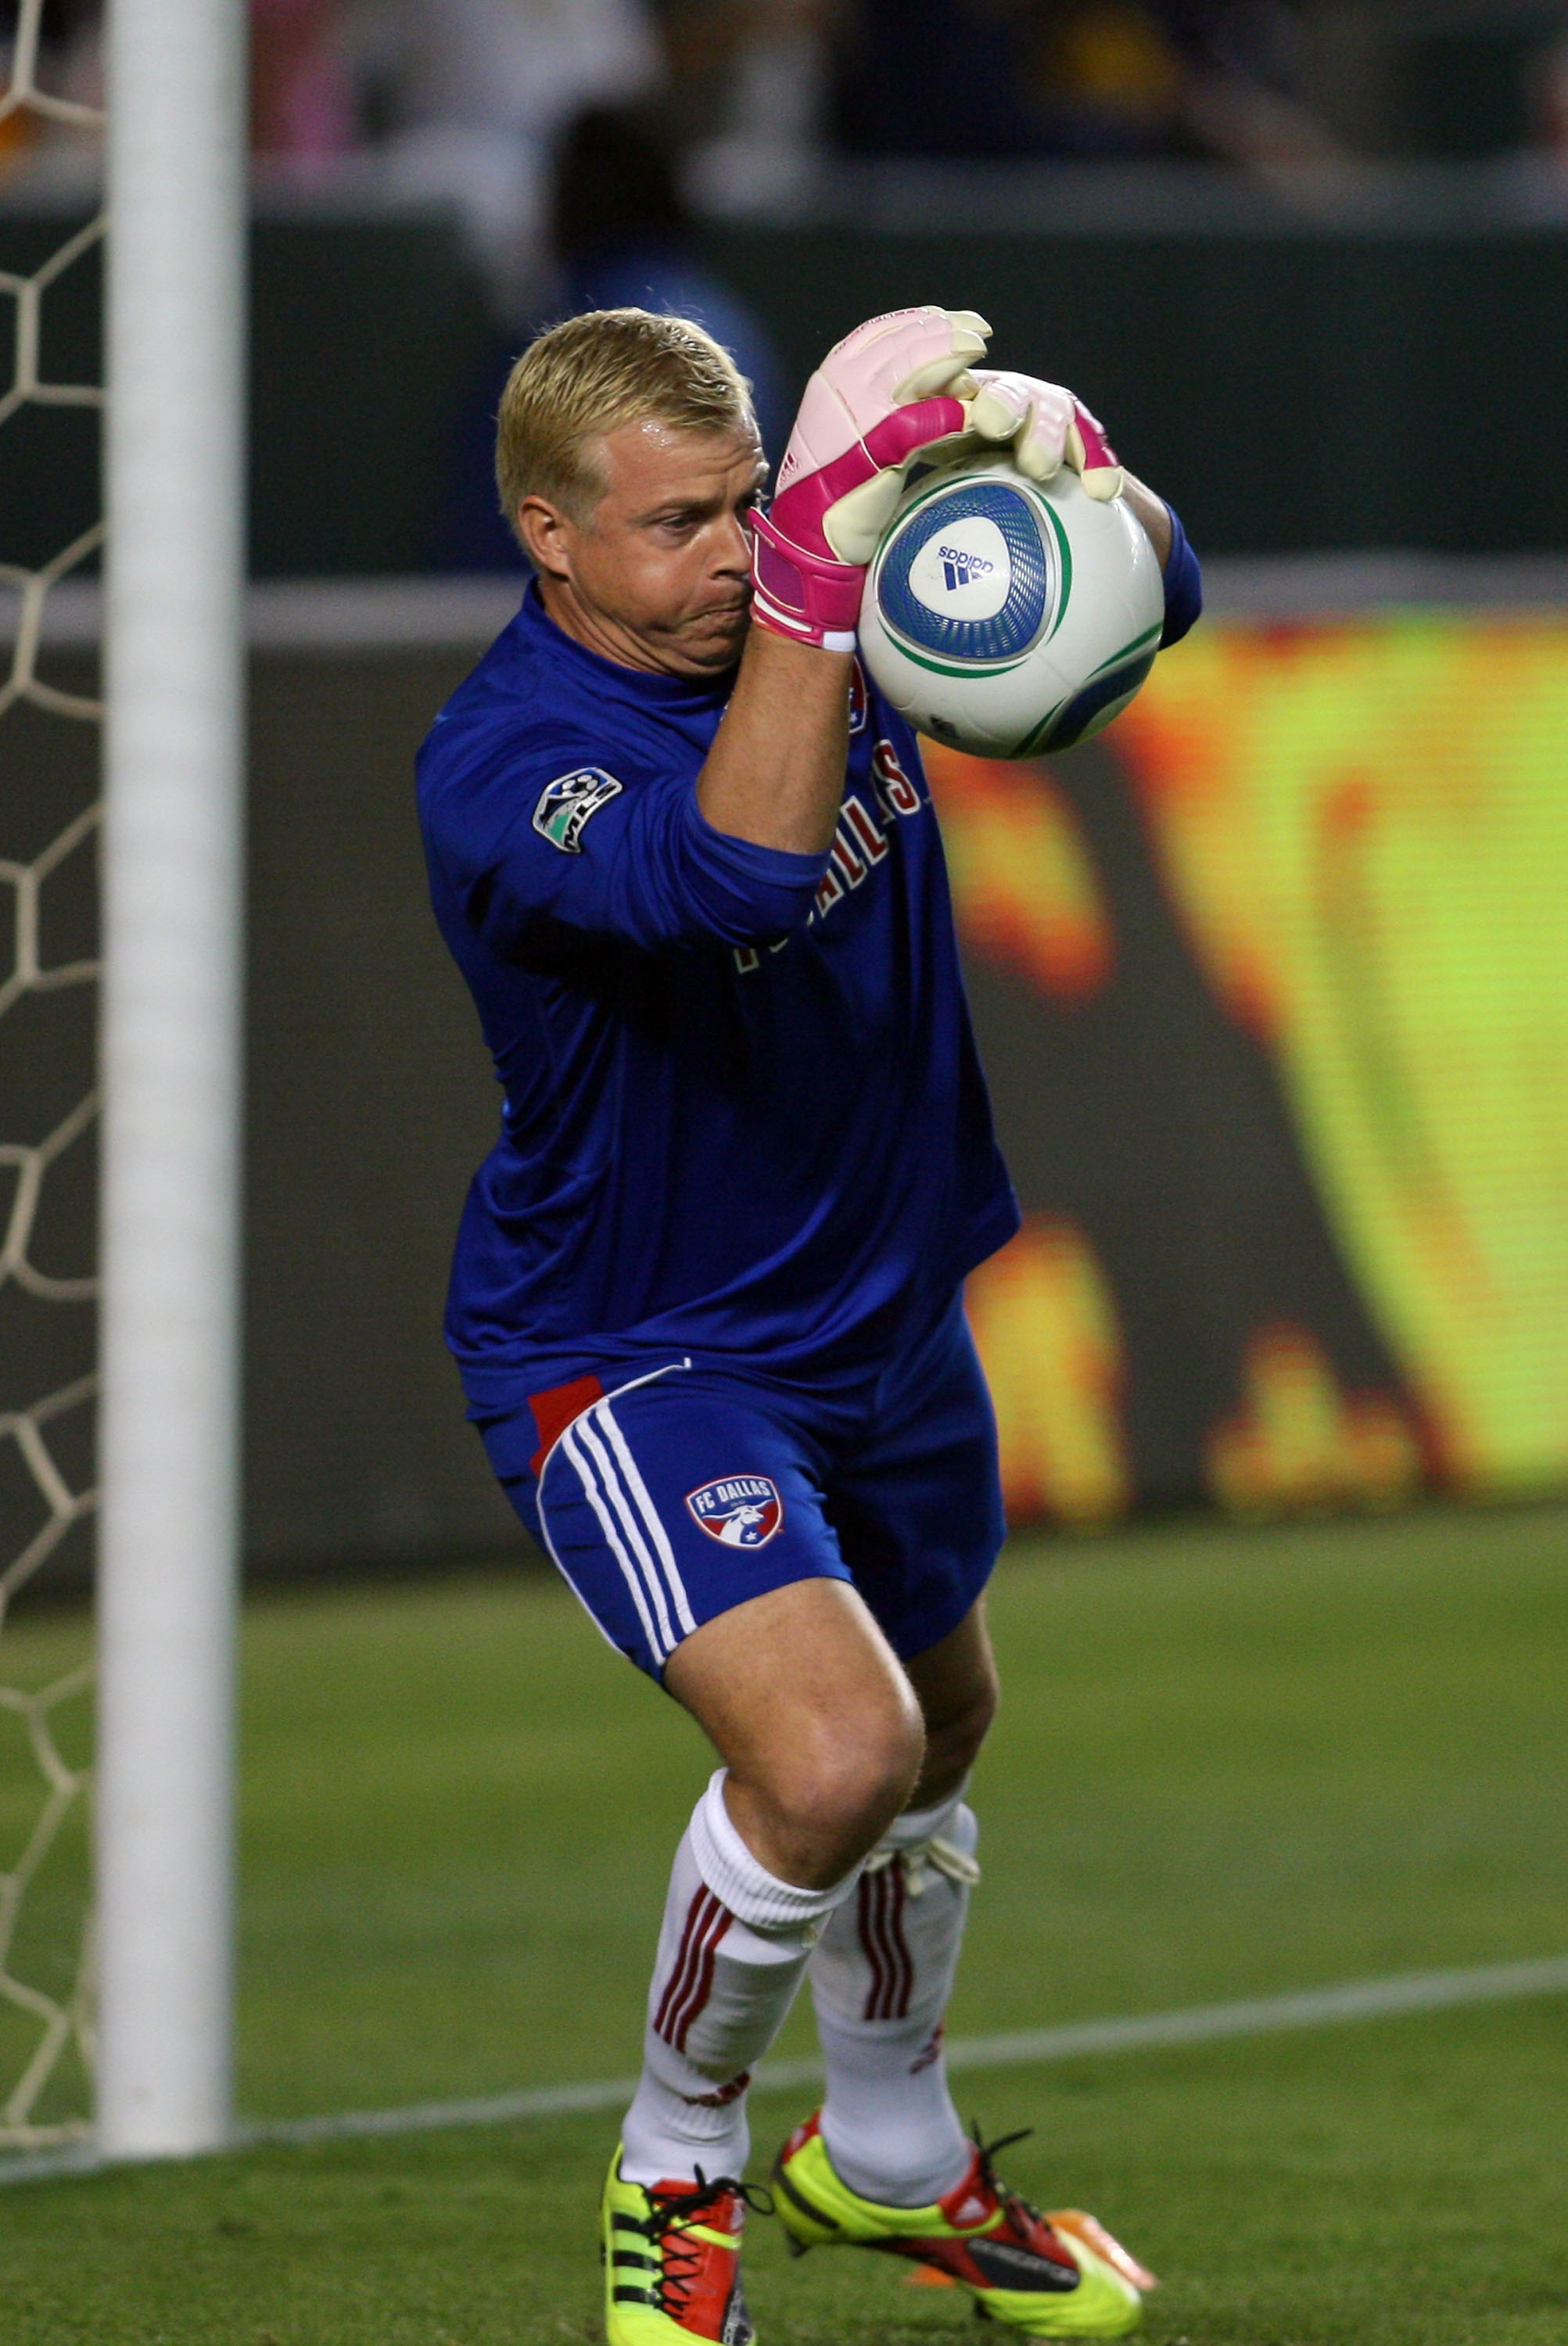 CARSON, CA - NOVEMBER 14:  Goalkeeper Kevin Hartman #1 of FC Dallas warms up prior to the Western Conference Finals of the MLS playoffs against the Los Angeles Galaxy at The Home Depot Center on November 14, 2010 in Carson, California. FC Dallas defeated 